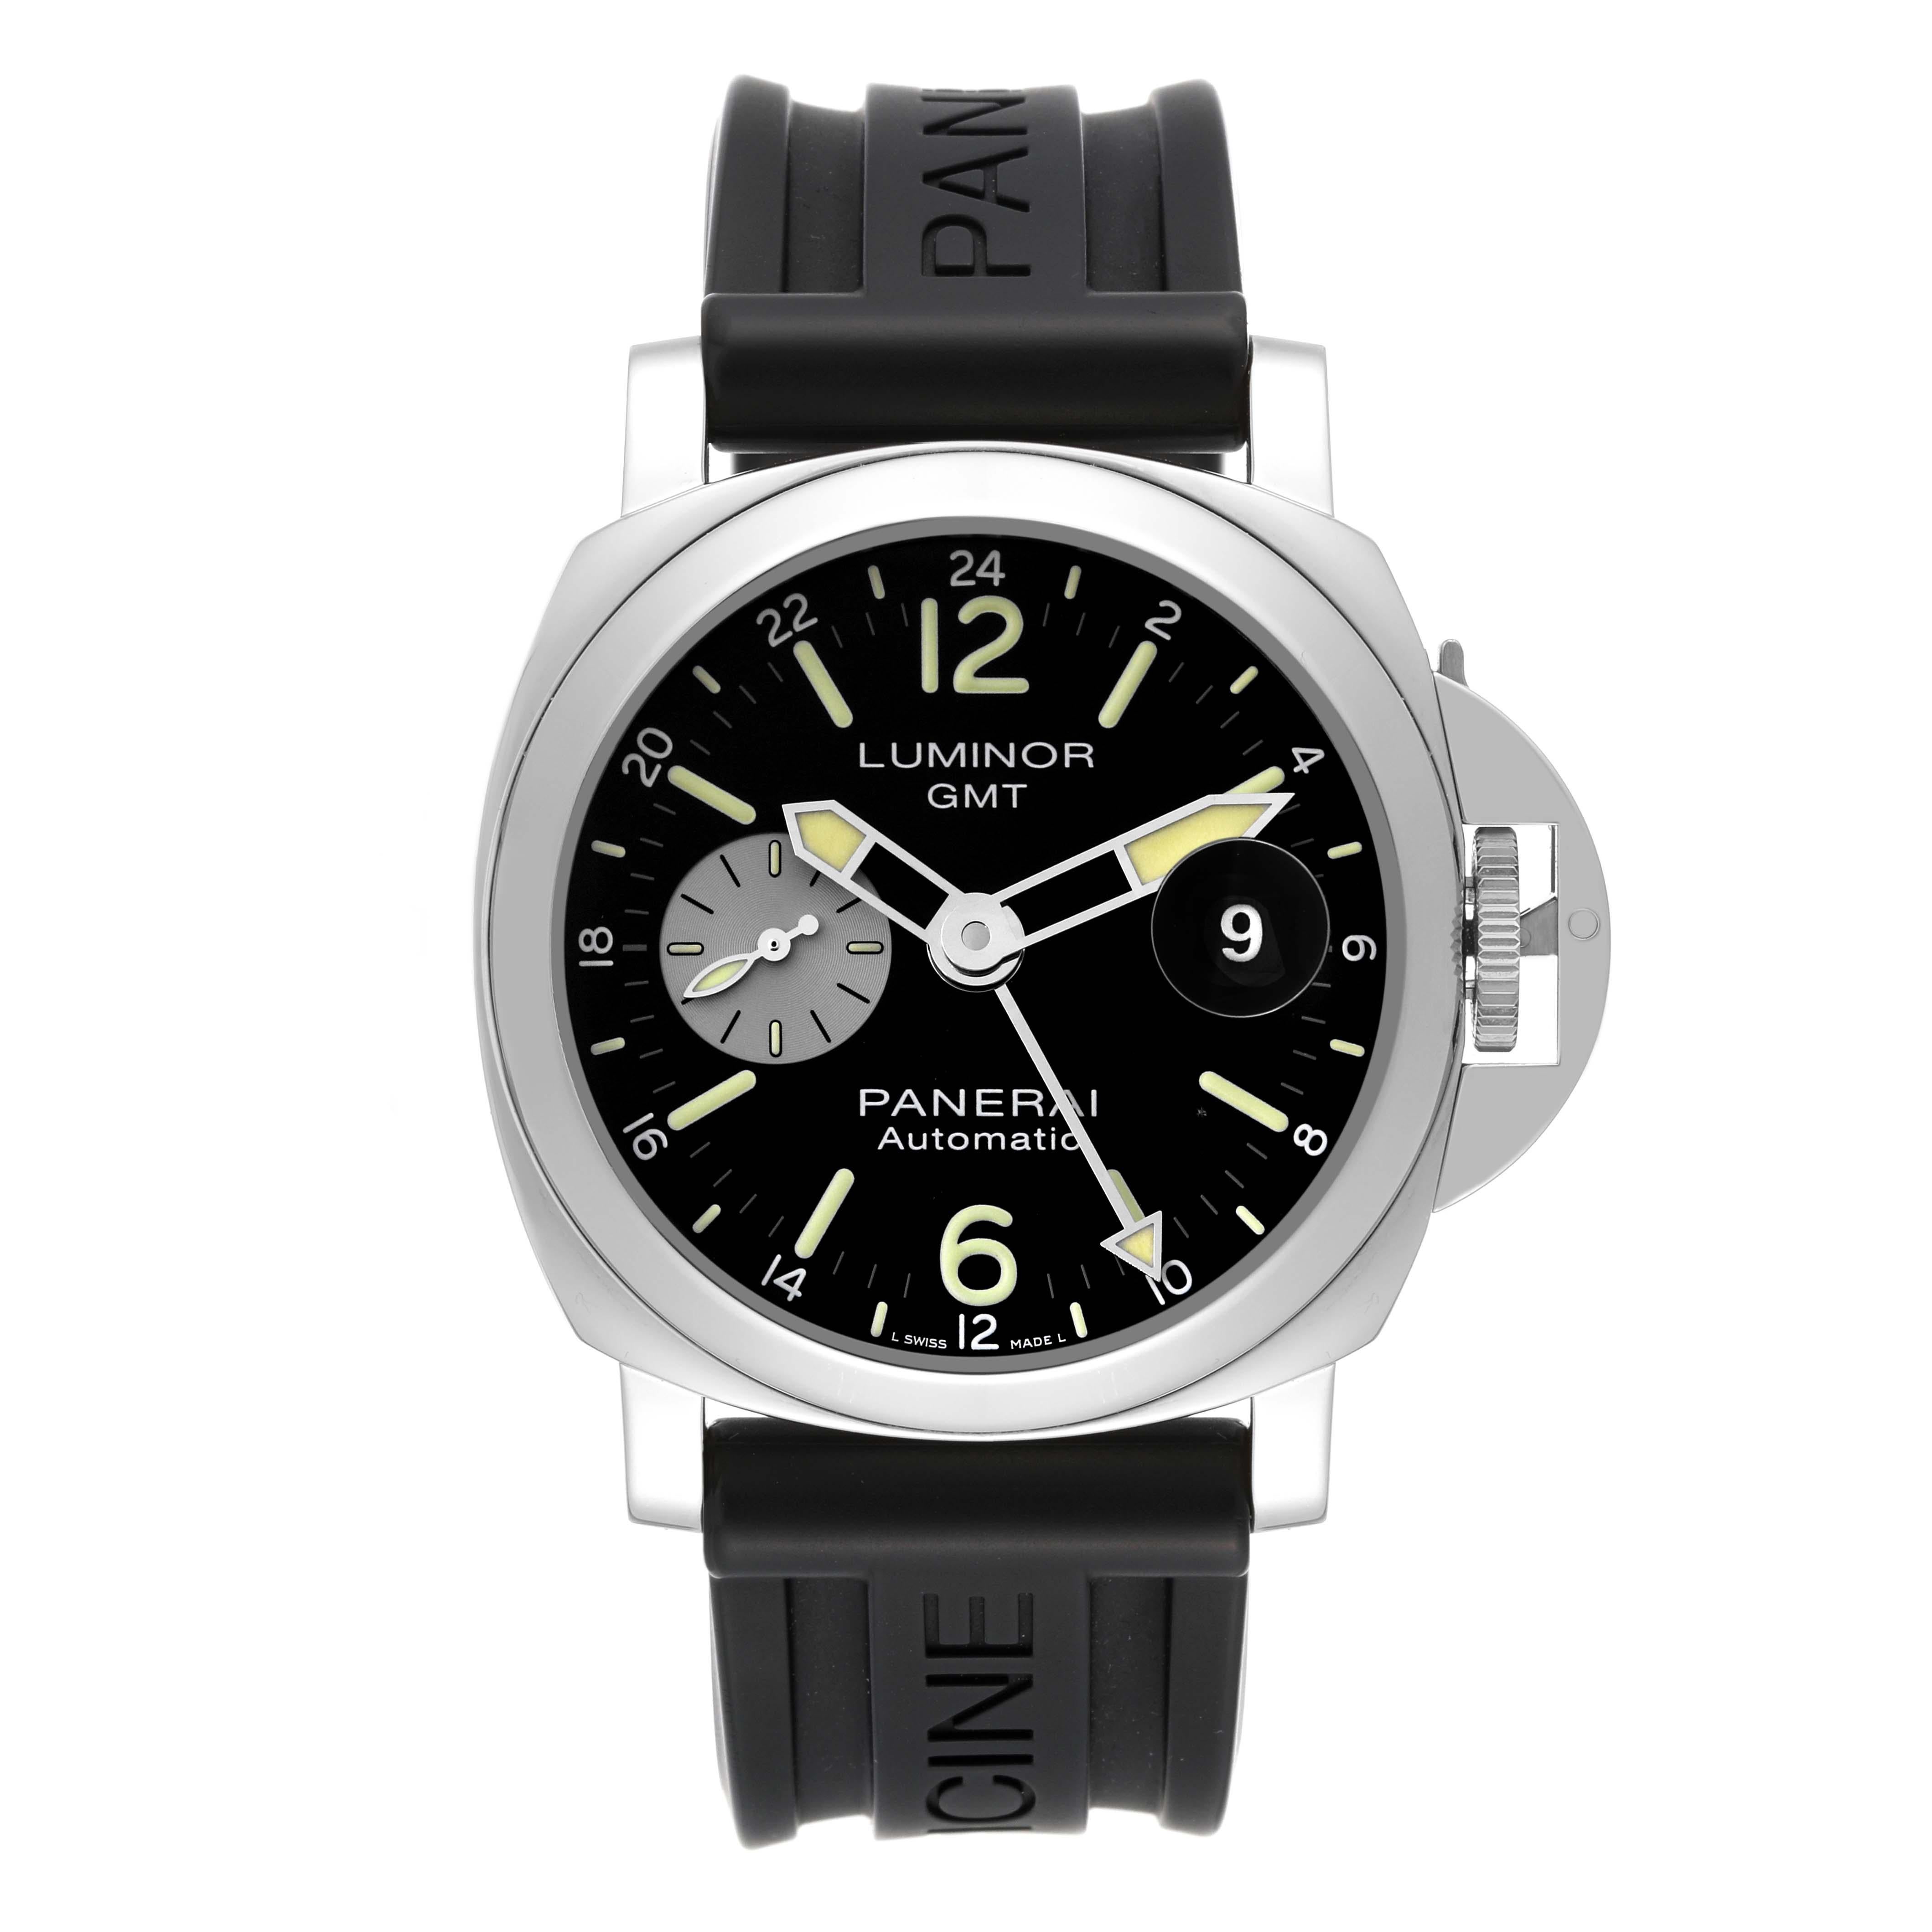 Panerai Luminor GMT 44mm Automatic Steel Mens Watch PAM01088 Box Card. Automatic self-winding movement. Stainless steel cushion case 44 mm in diameter. Panerai patented crown protector. Stainless steel sloped bezel. Scratch resistant sapphire